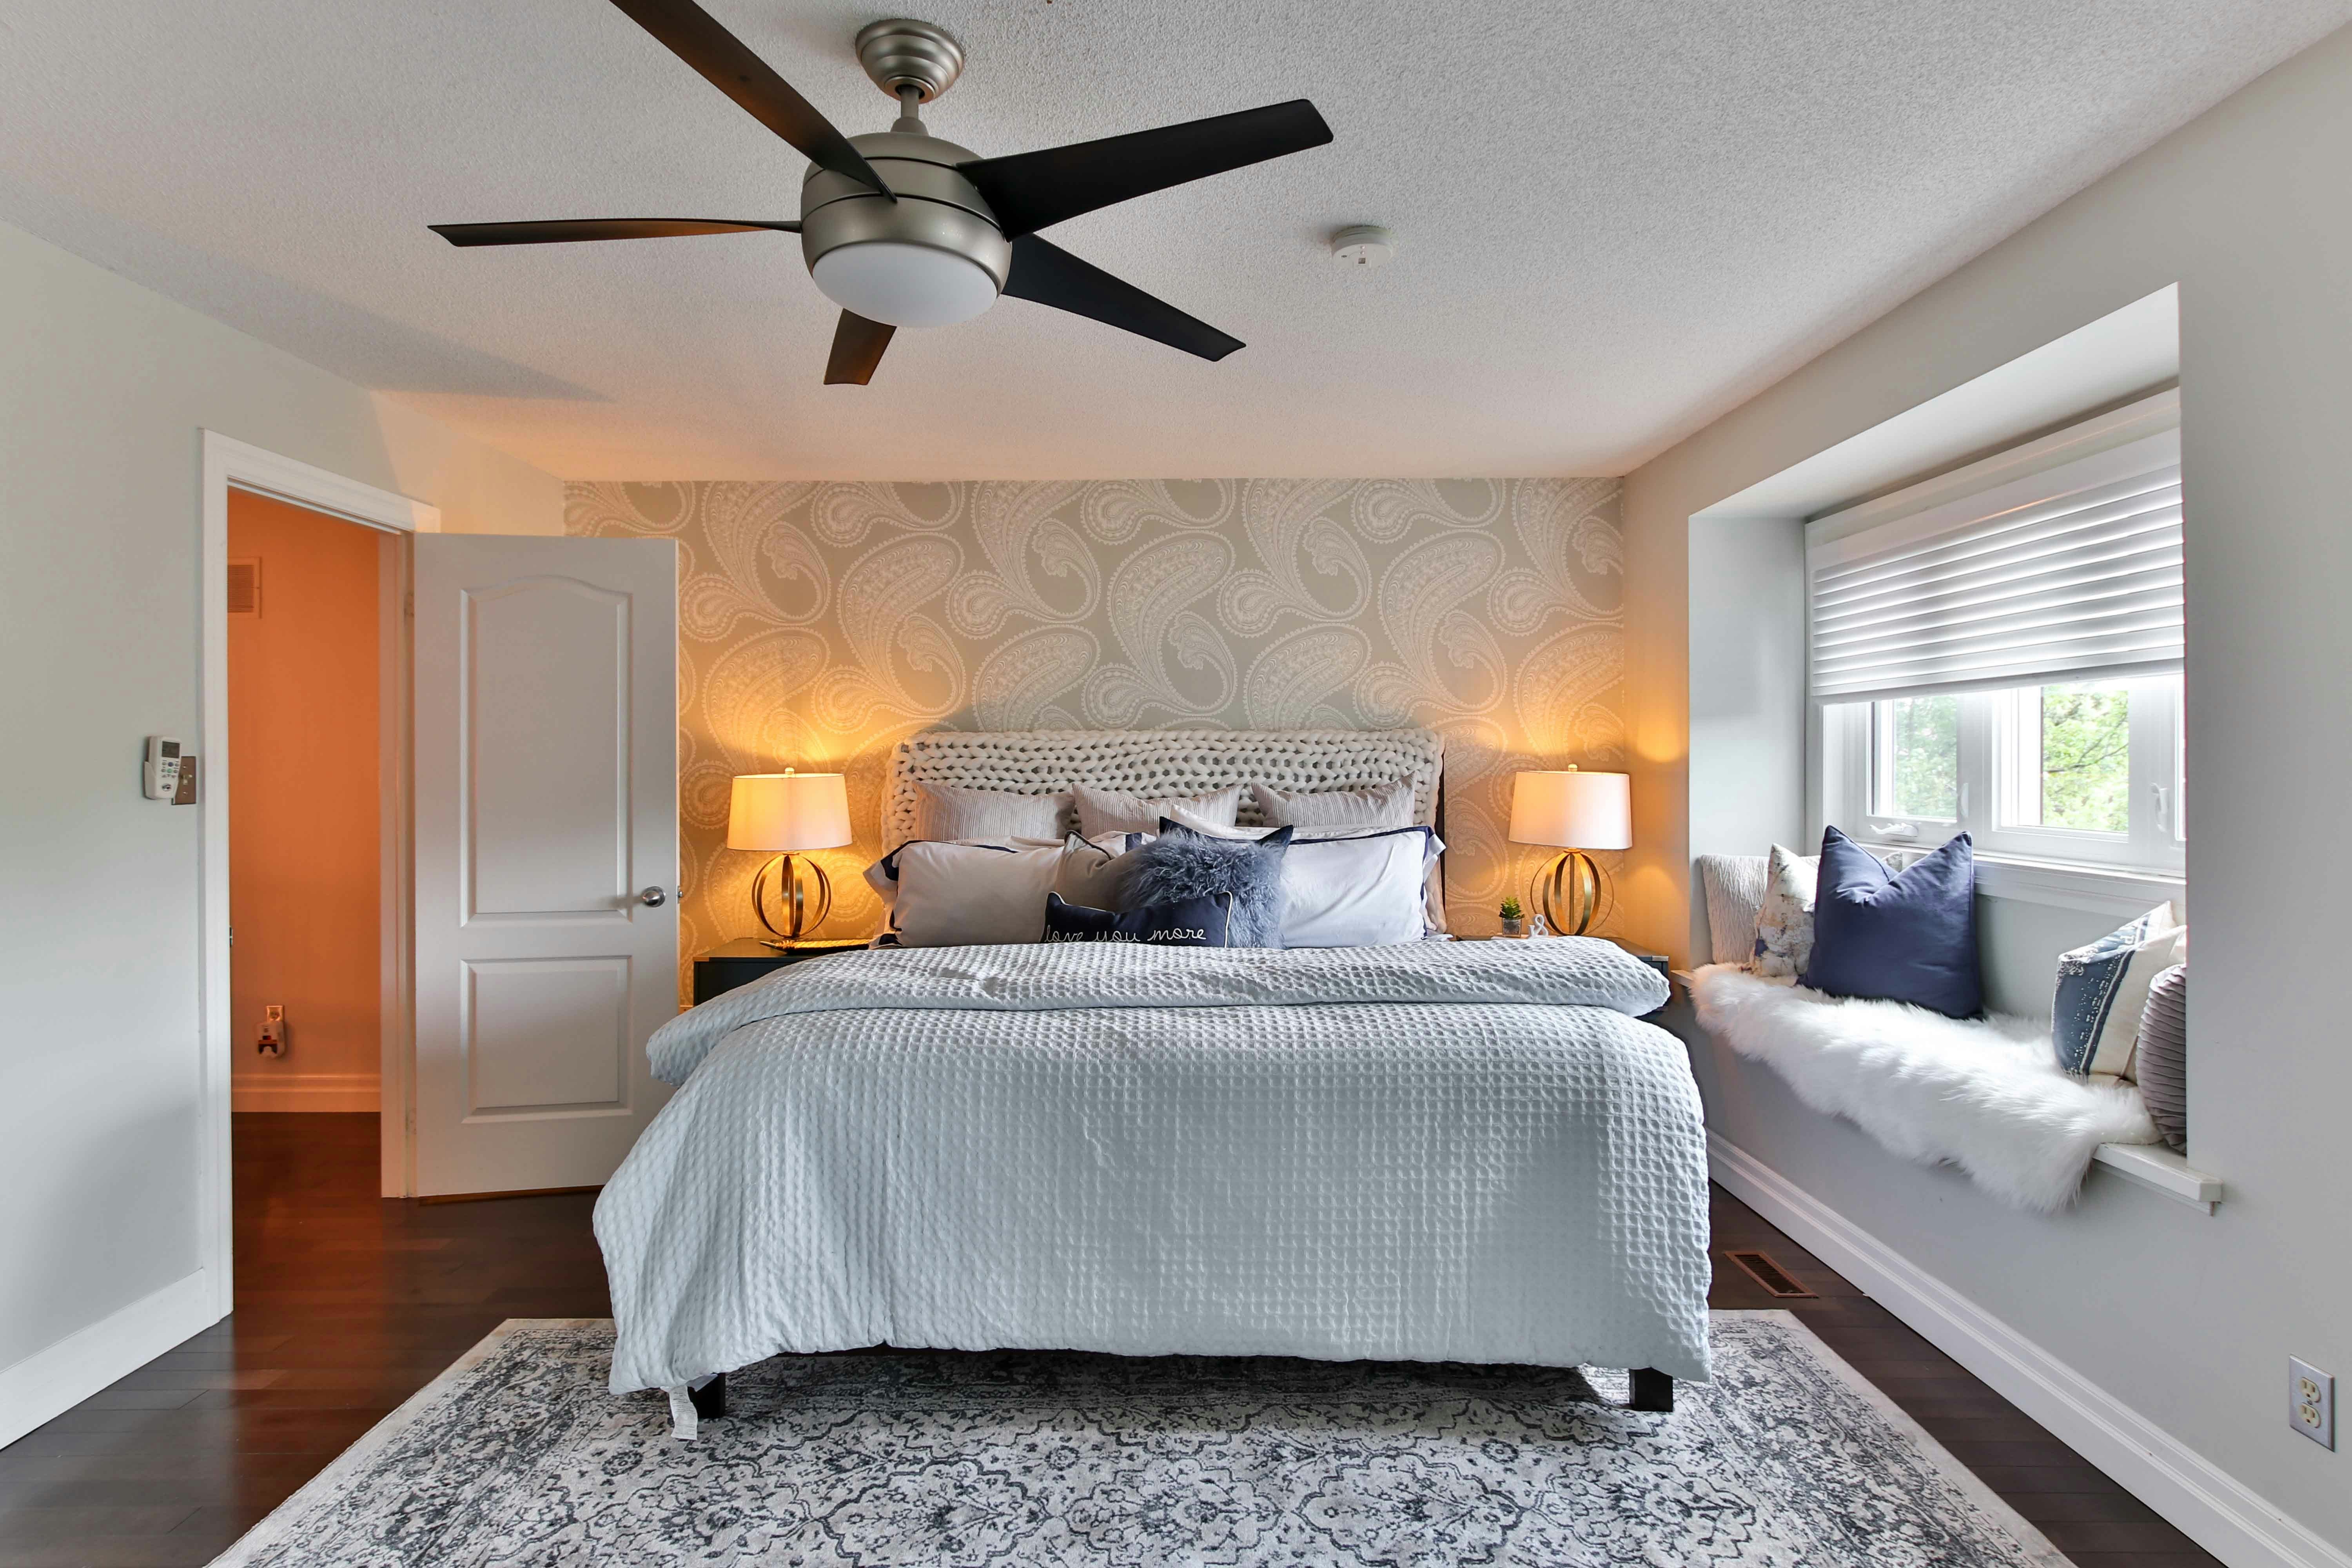 Bedroom in a DC home with a new ceiling fan installed.